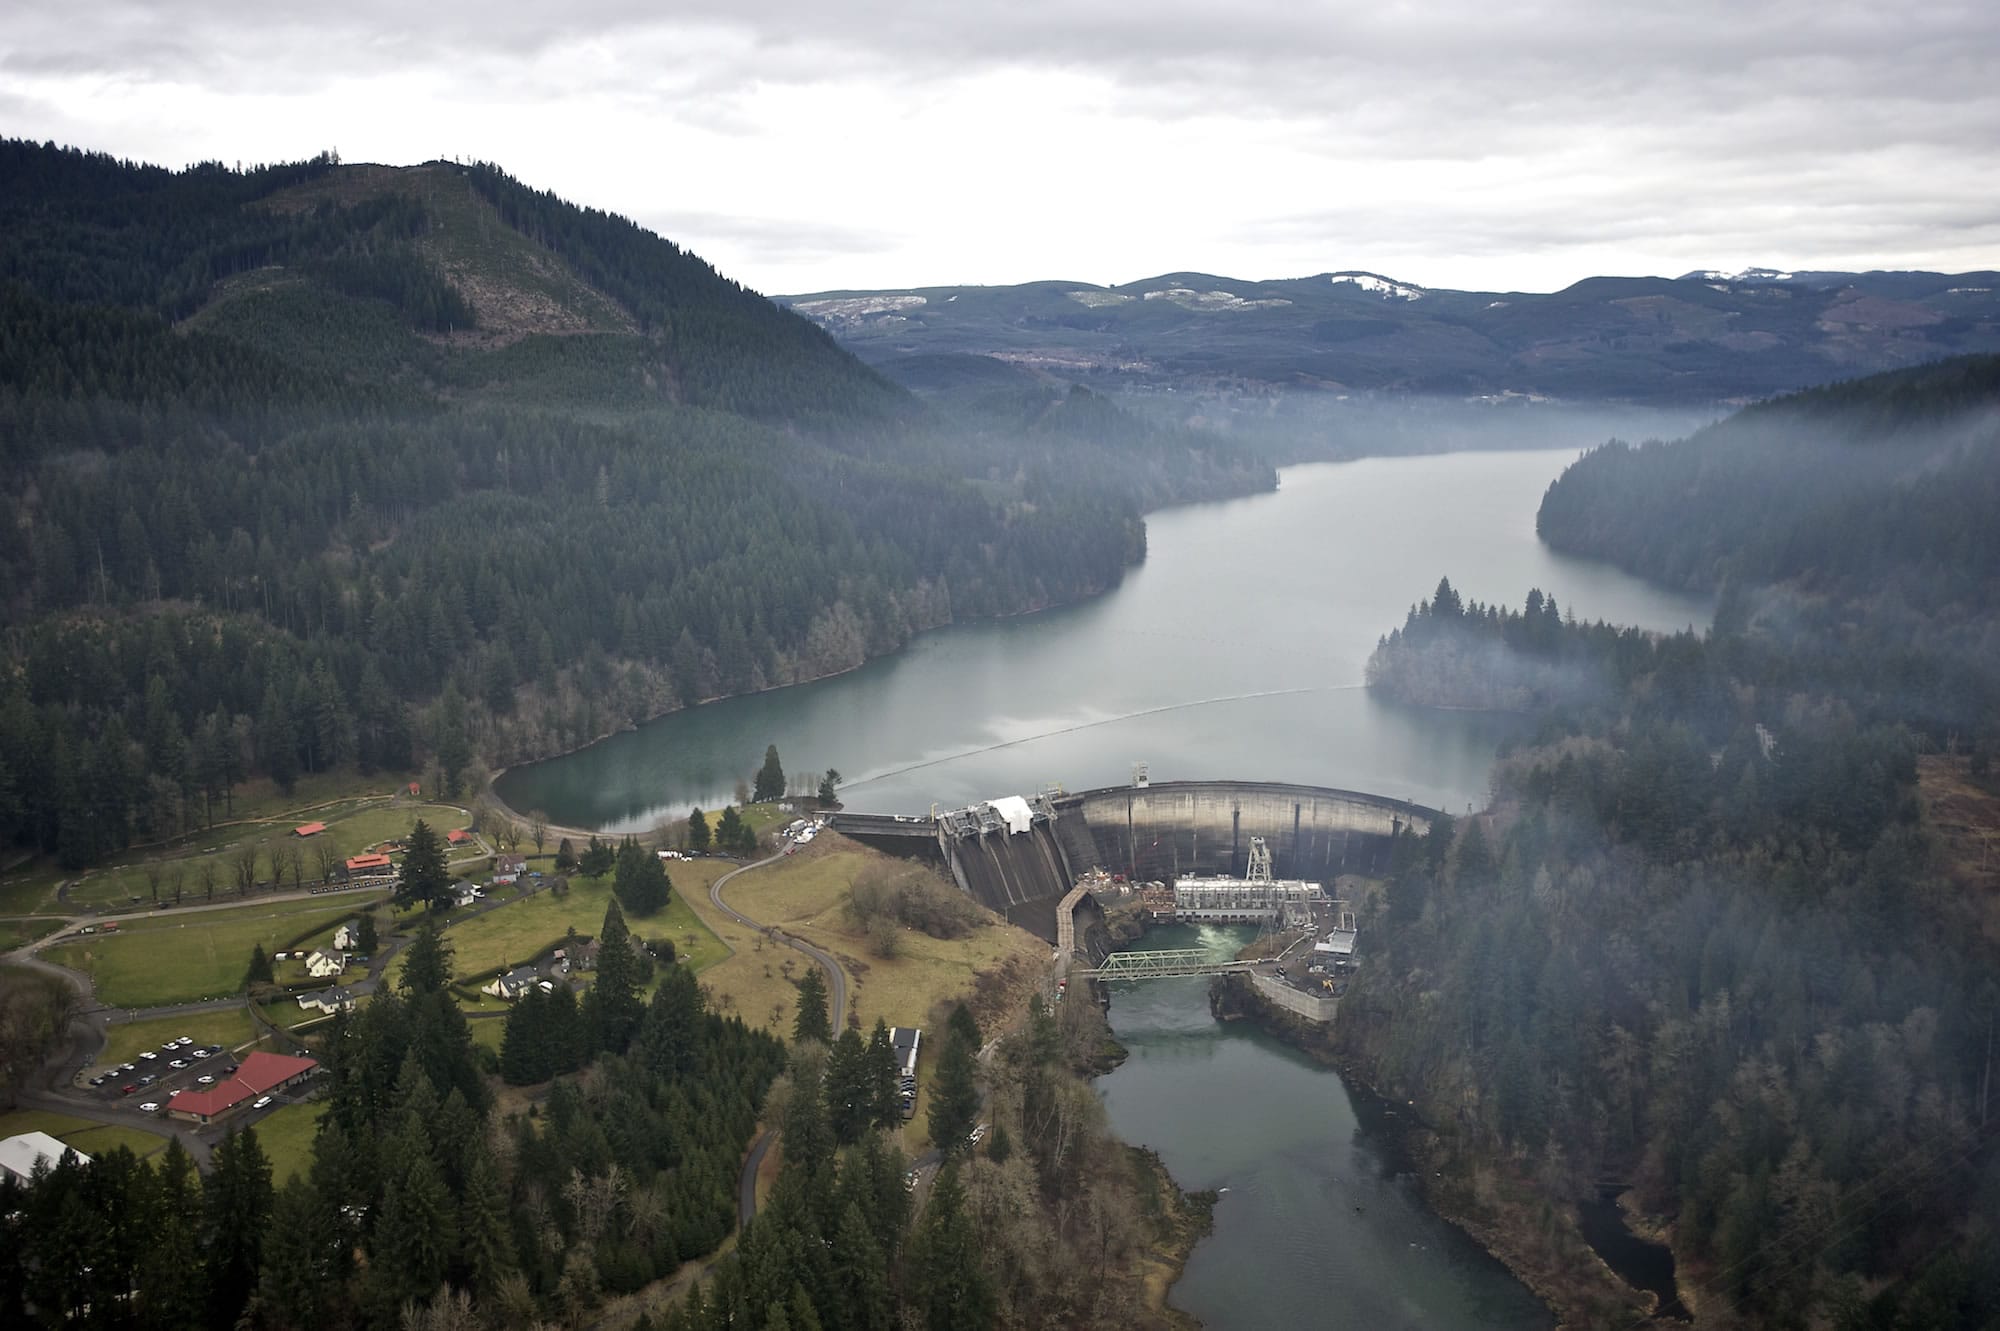 If built, a proposed 500-kilovolt transmission line would cross the Clark-Cowlitz county line just below Merwin Dam, shown here.